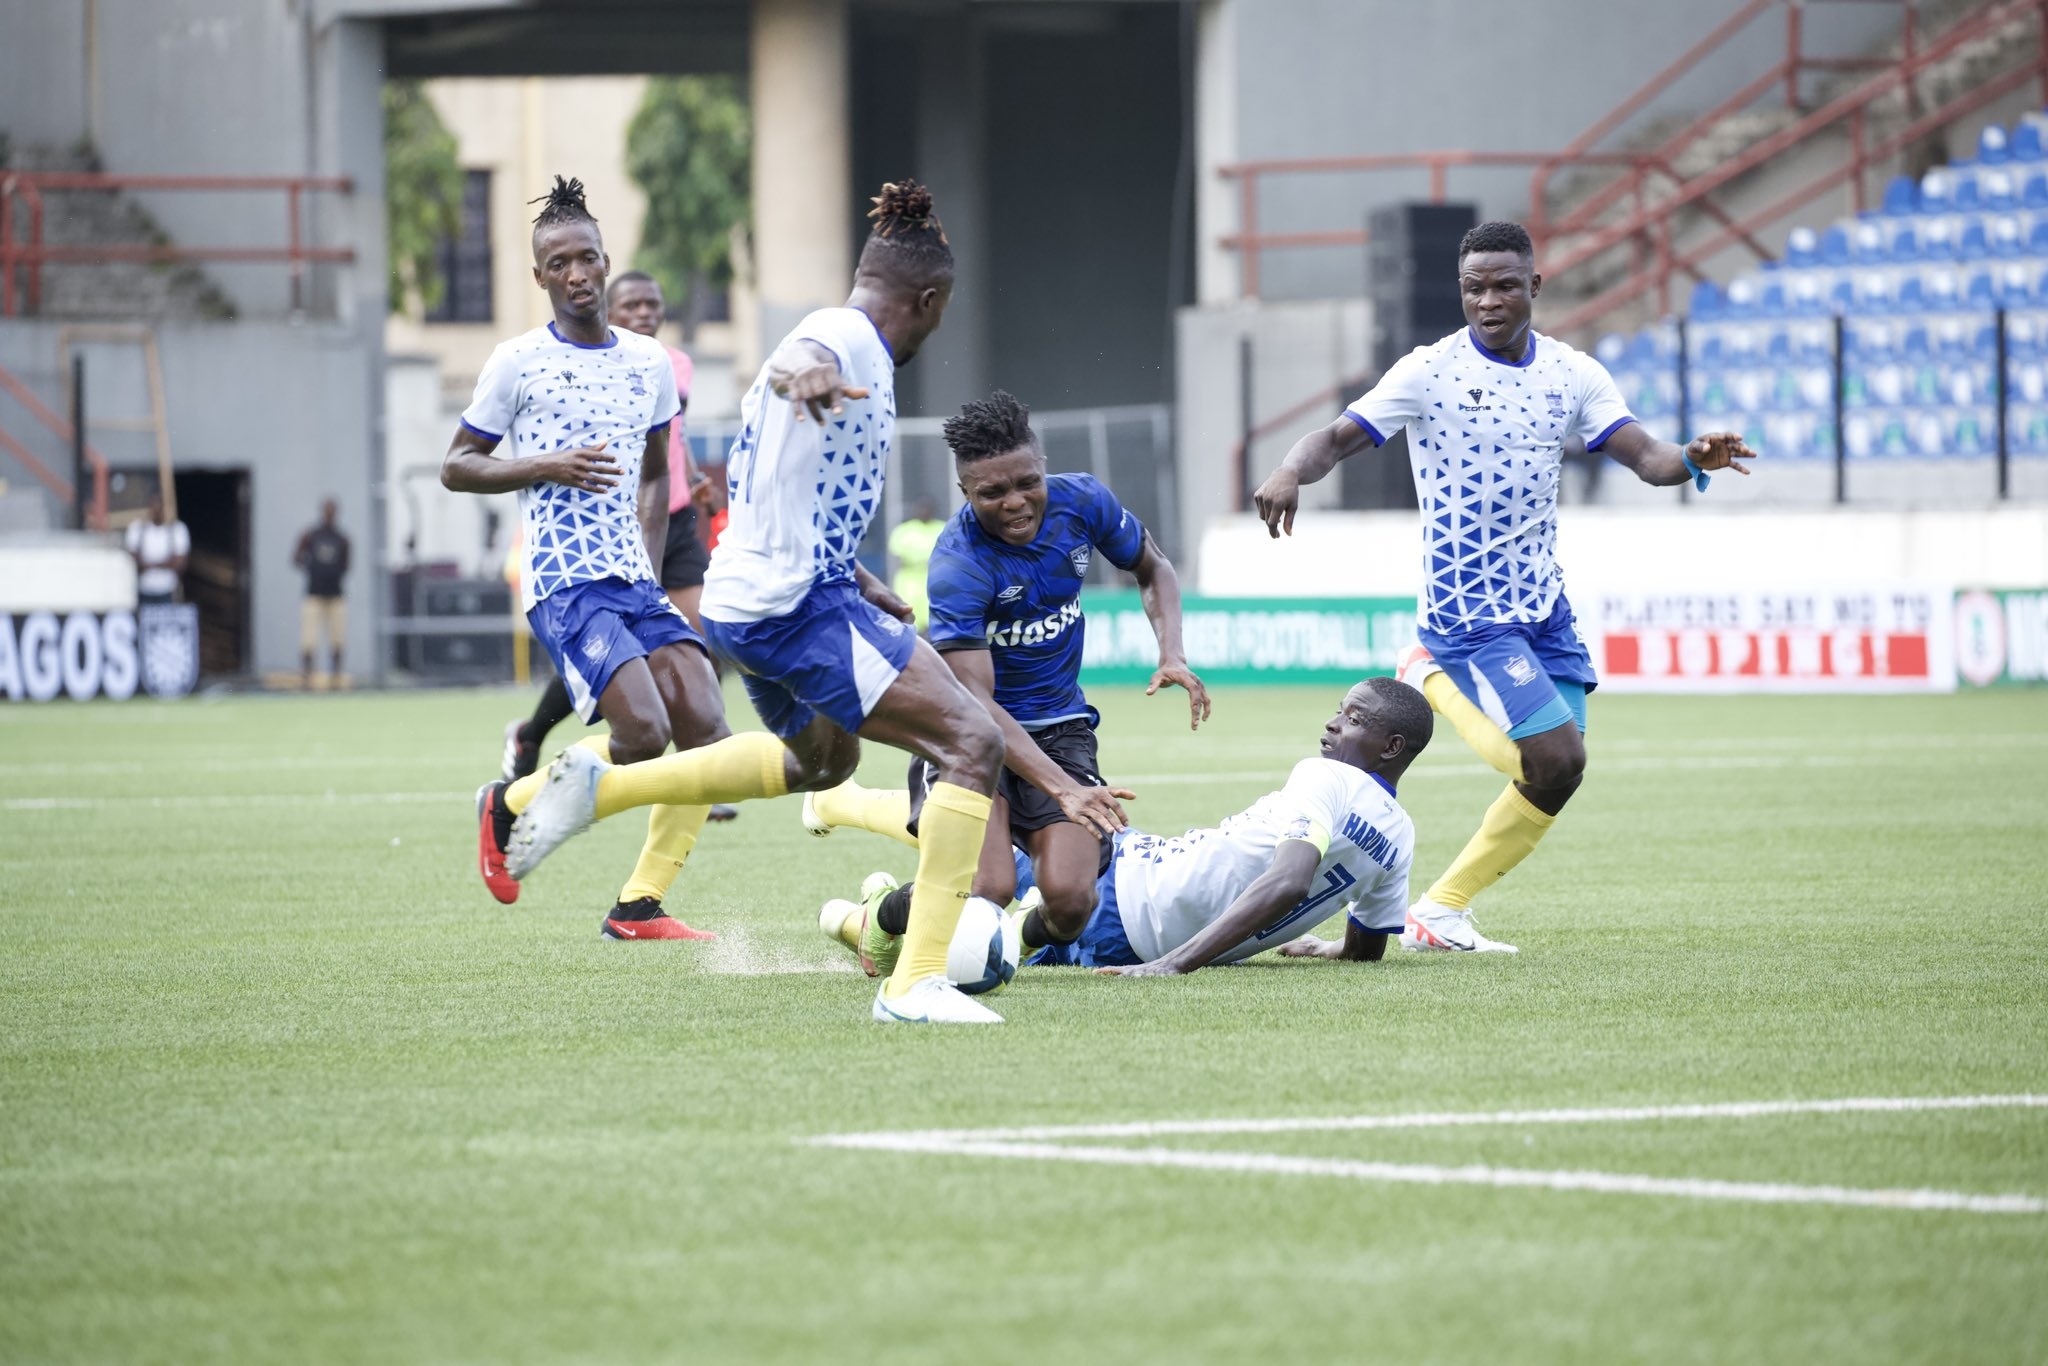 Sporting Lagos settles for a draw against Doma United. Get the details of the closely contested game and Sporting Lagos' unbeaten streak.